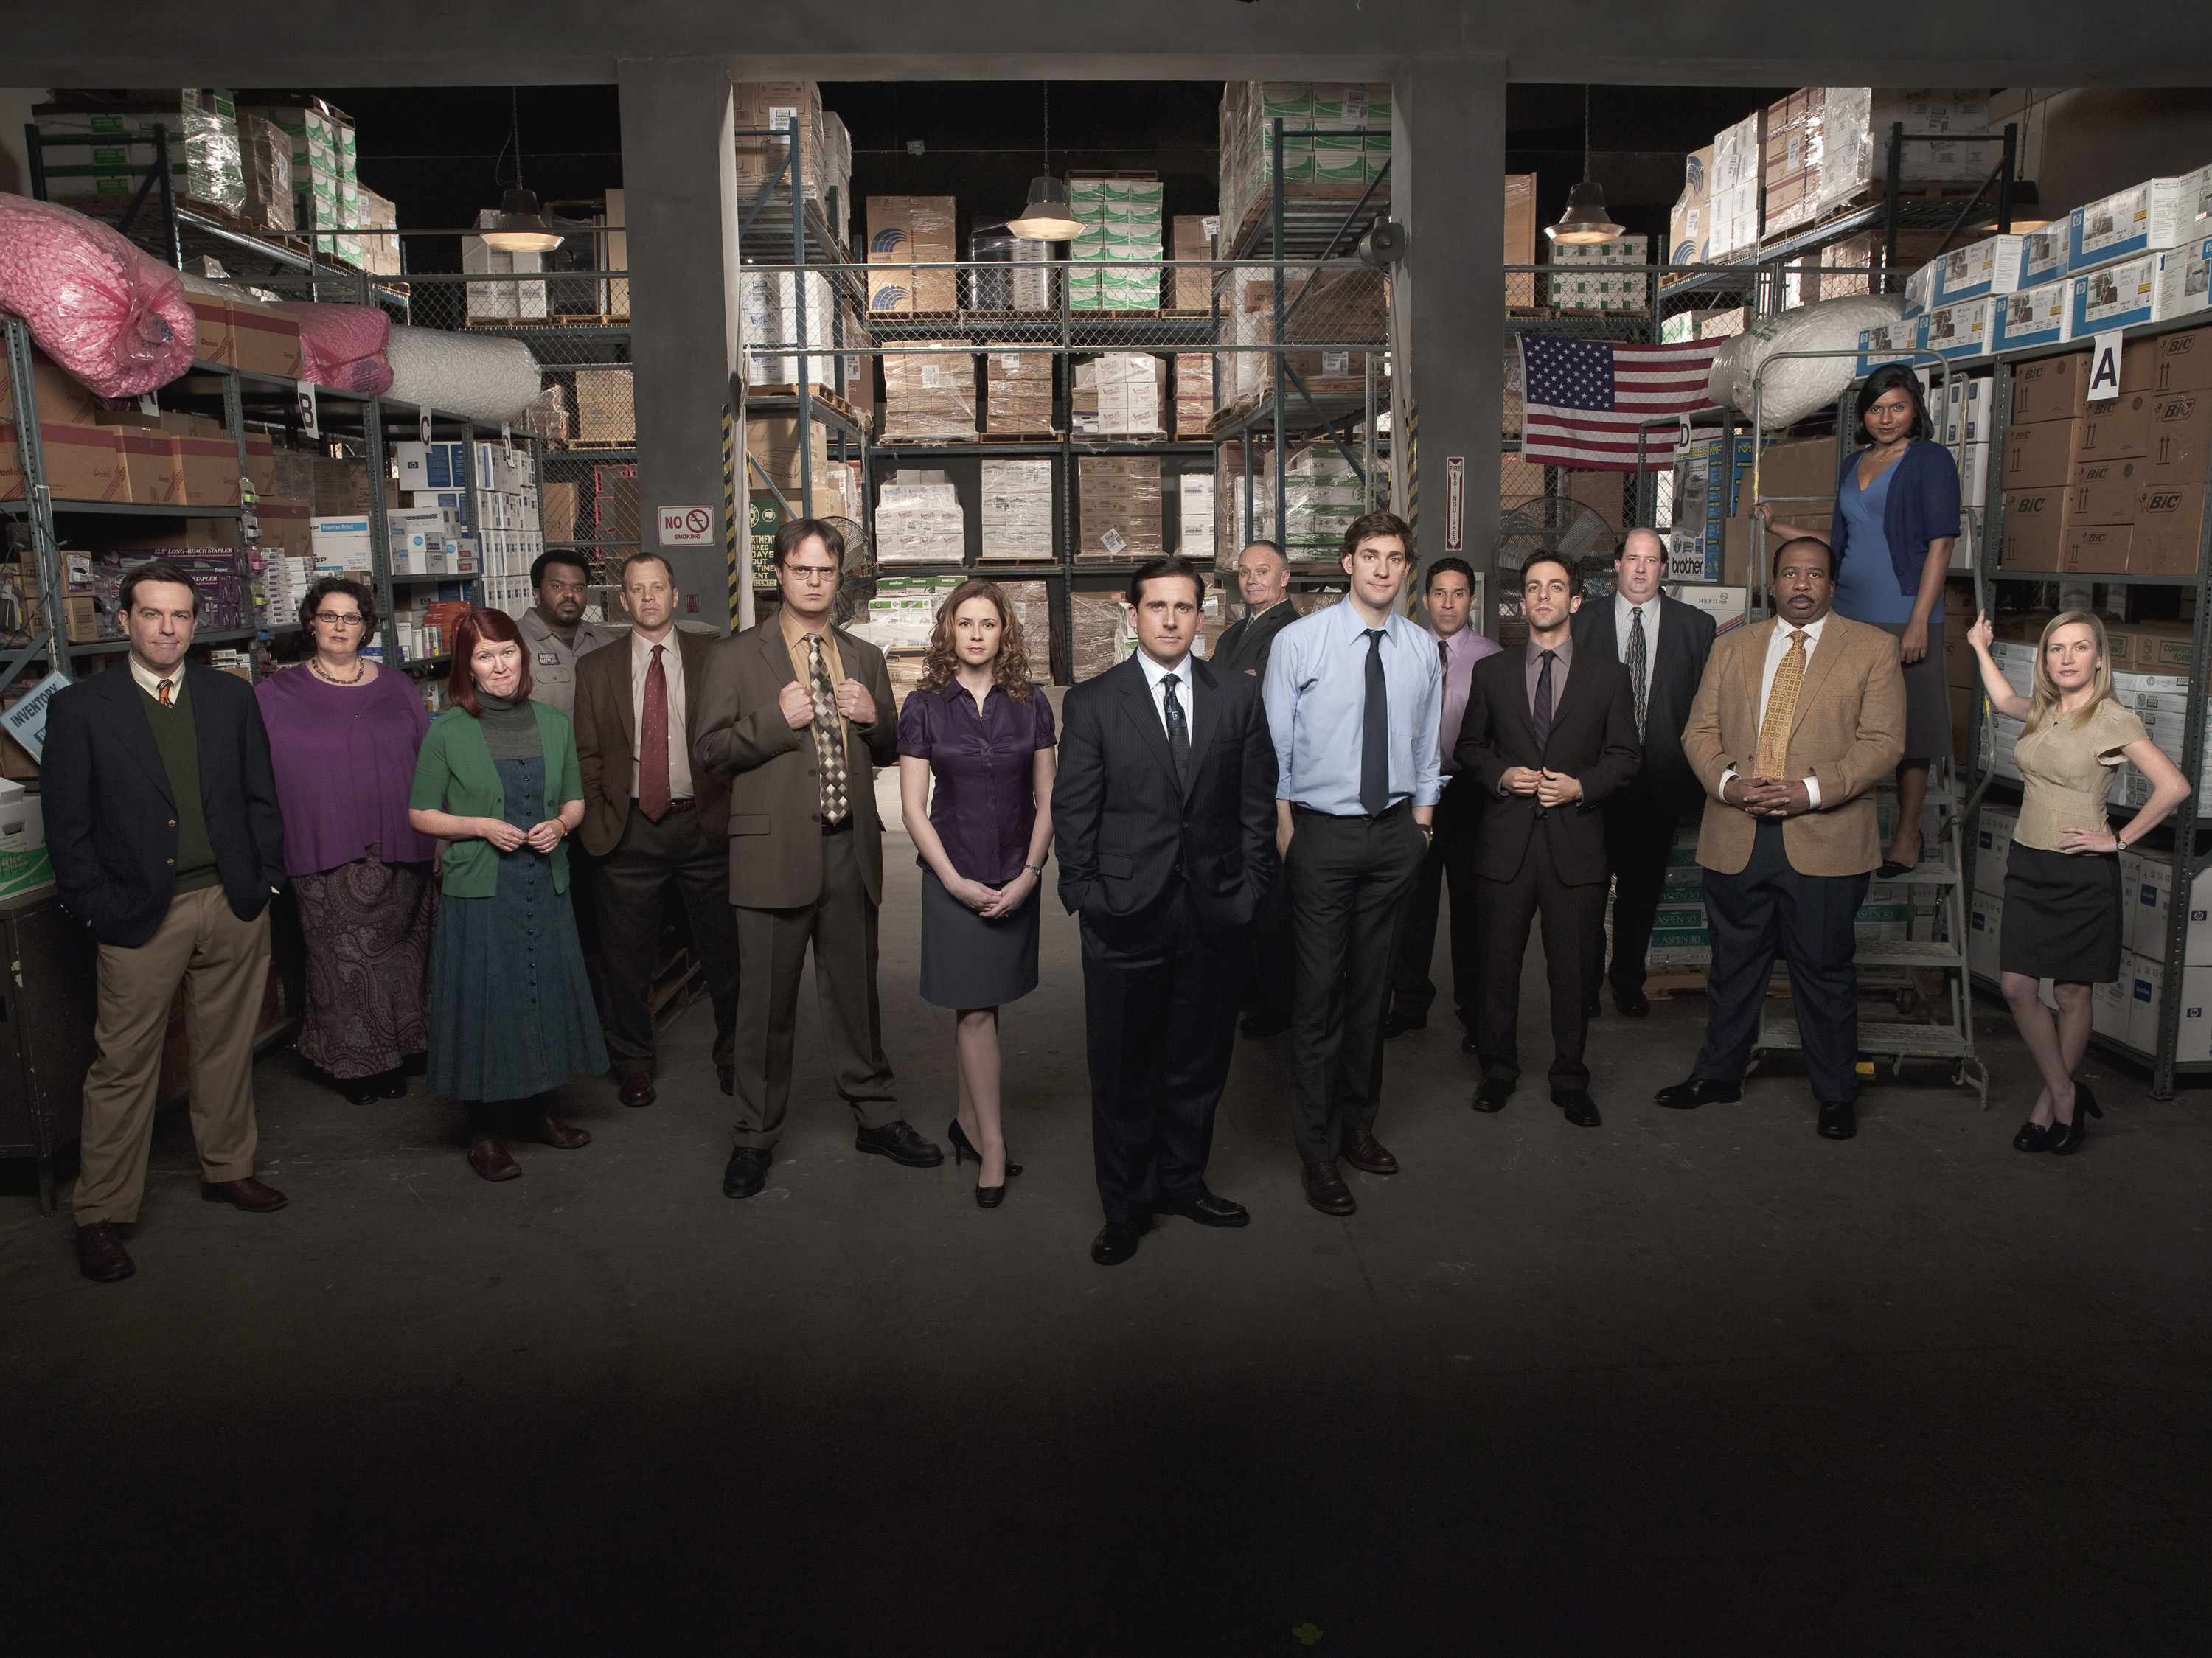 The cast of 'The Office' poses for a promotional photo in the warehouse